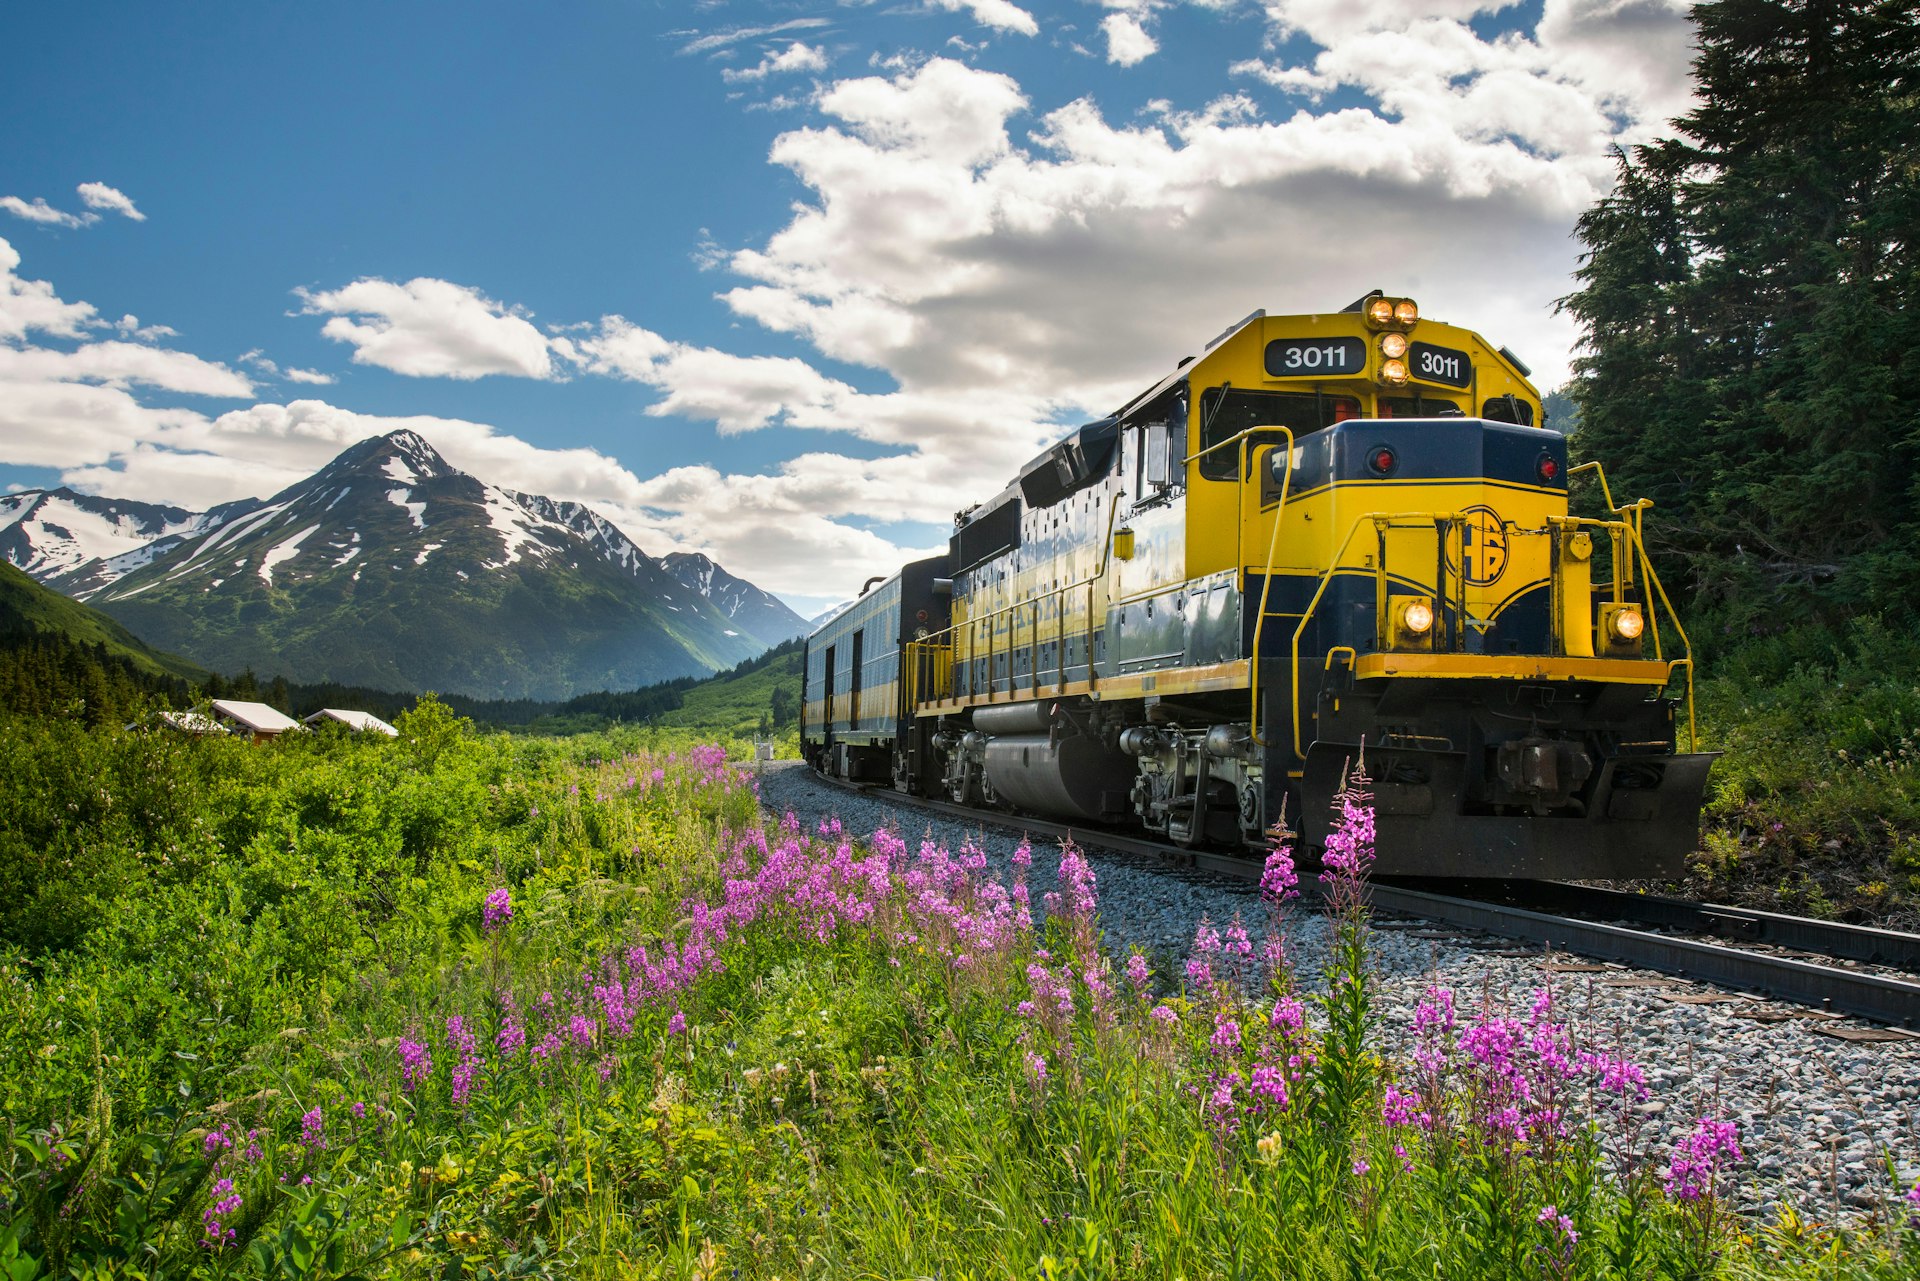 The Alaska Railroad train rolls through Chugach National Forest with mountains in the background 